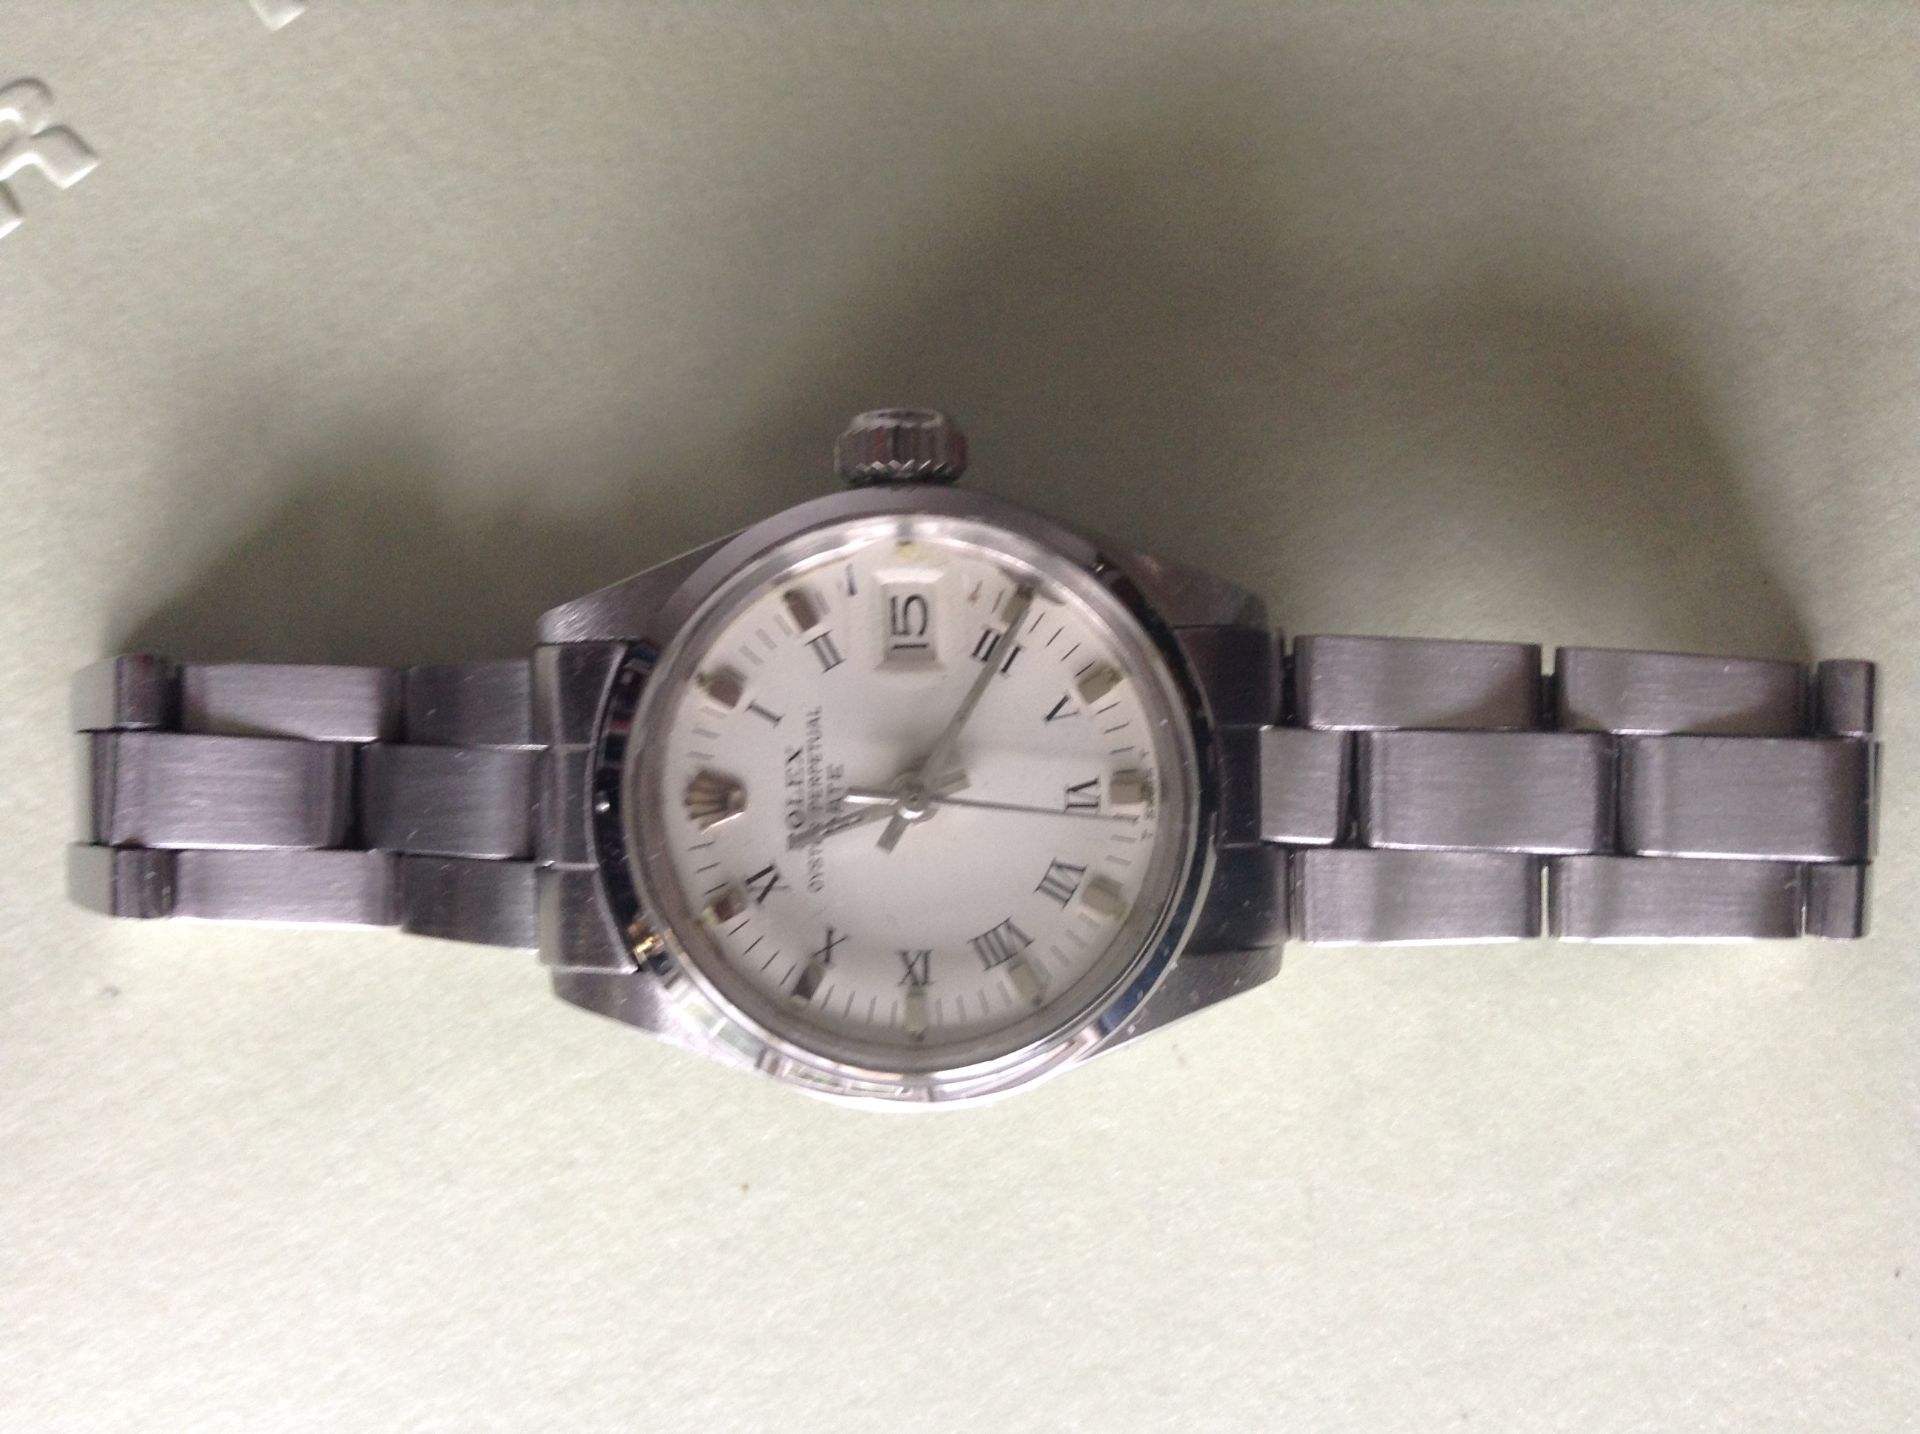 Rolex ladies oyster perpetual date 6516 in stainless steel with oyster bracelet - Image 5 of 6